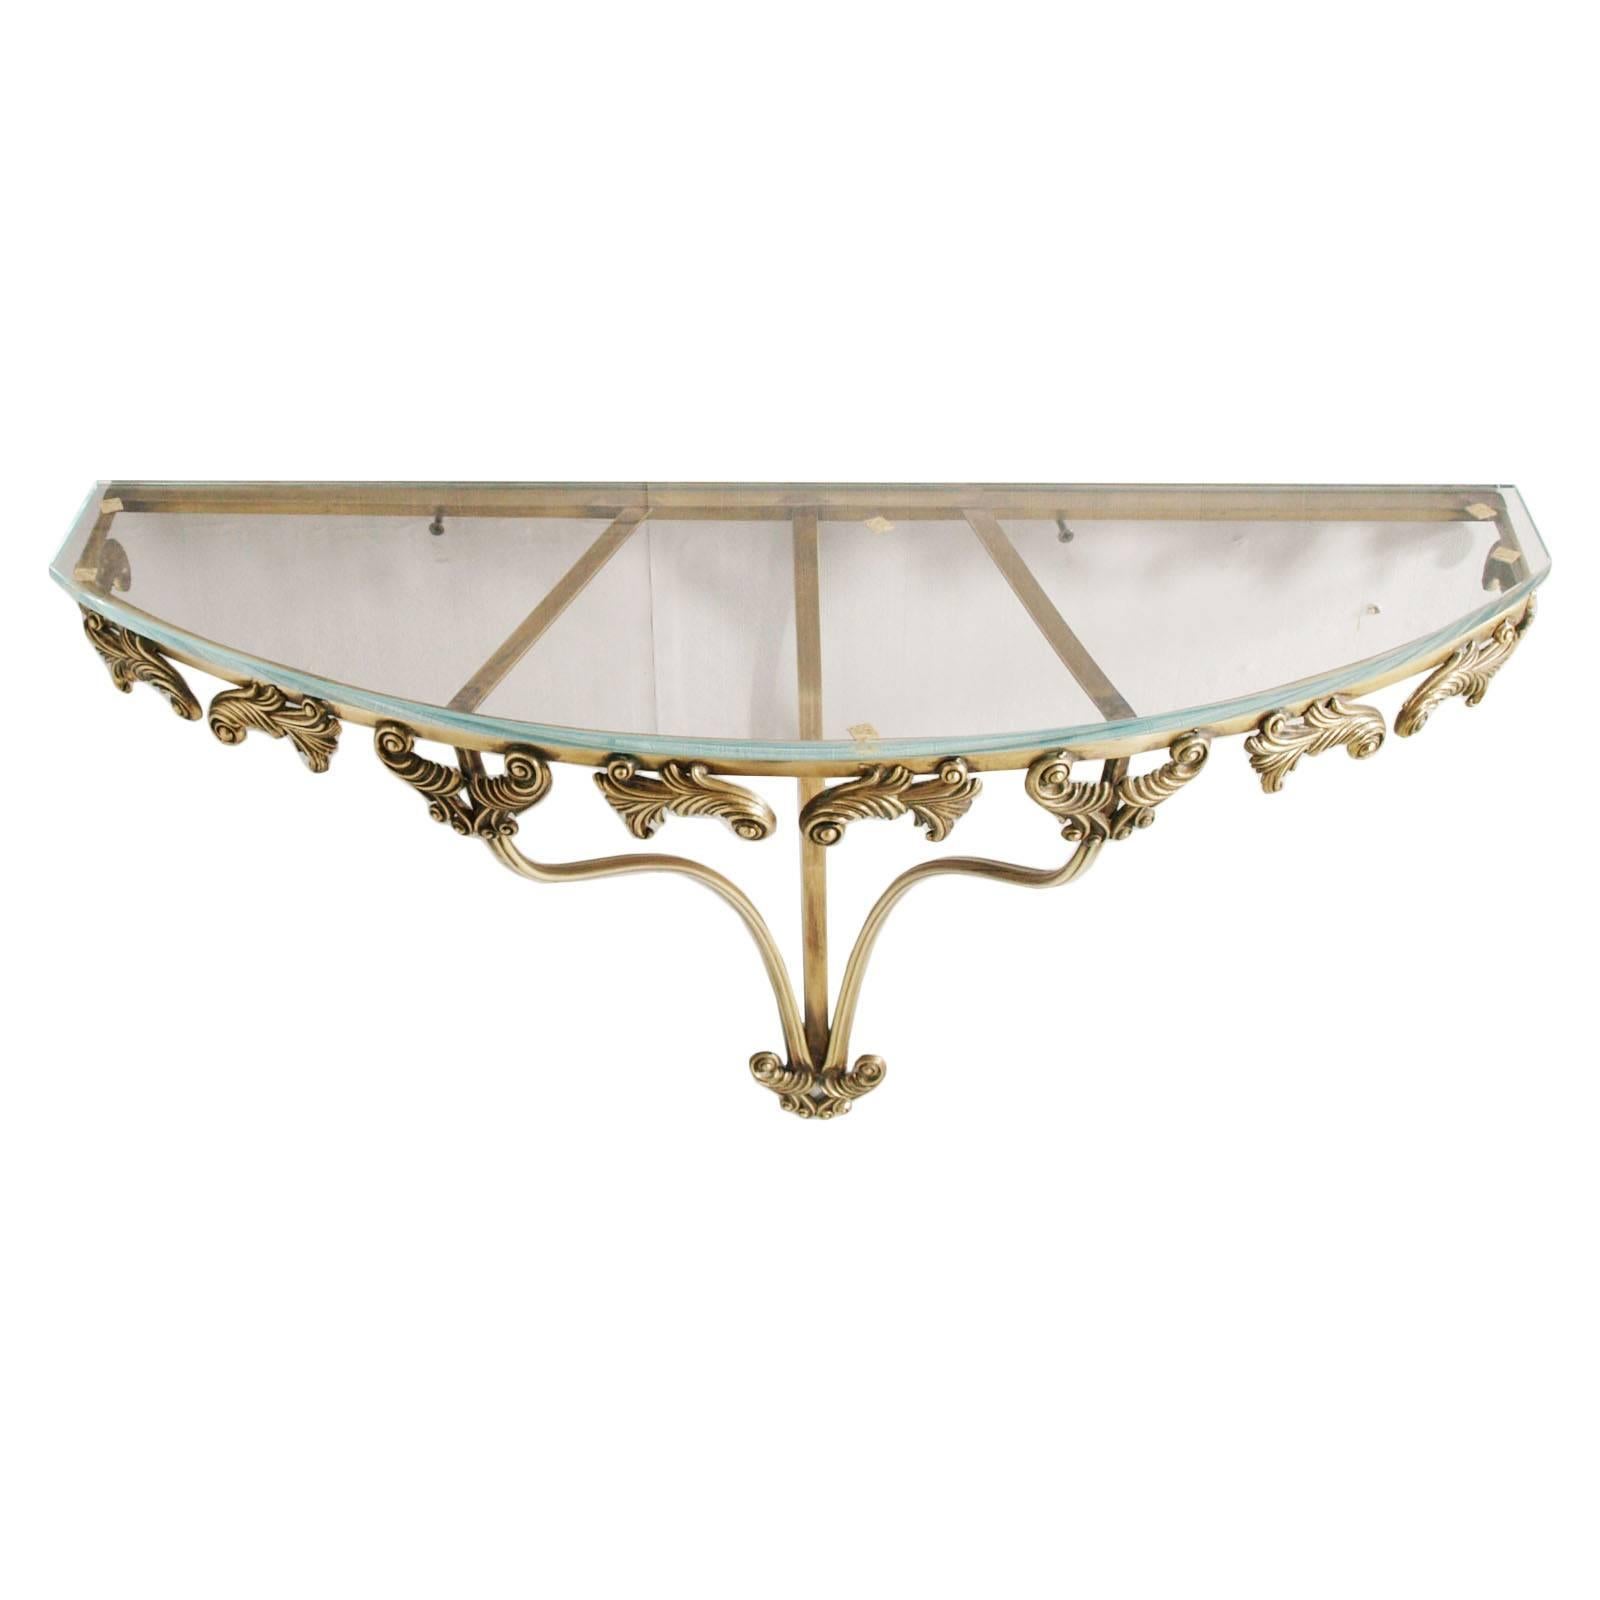 Mid-Century Modern console or nightstand in gilt bronze and brass, cristal, attributed to Colli, Torino, circa 1940's.
Measures cm: H 47, W 66, D 22.


About Pier Luigi Colli : History
The company was founded in Turin in 1850, as a workshop that